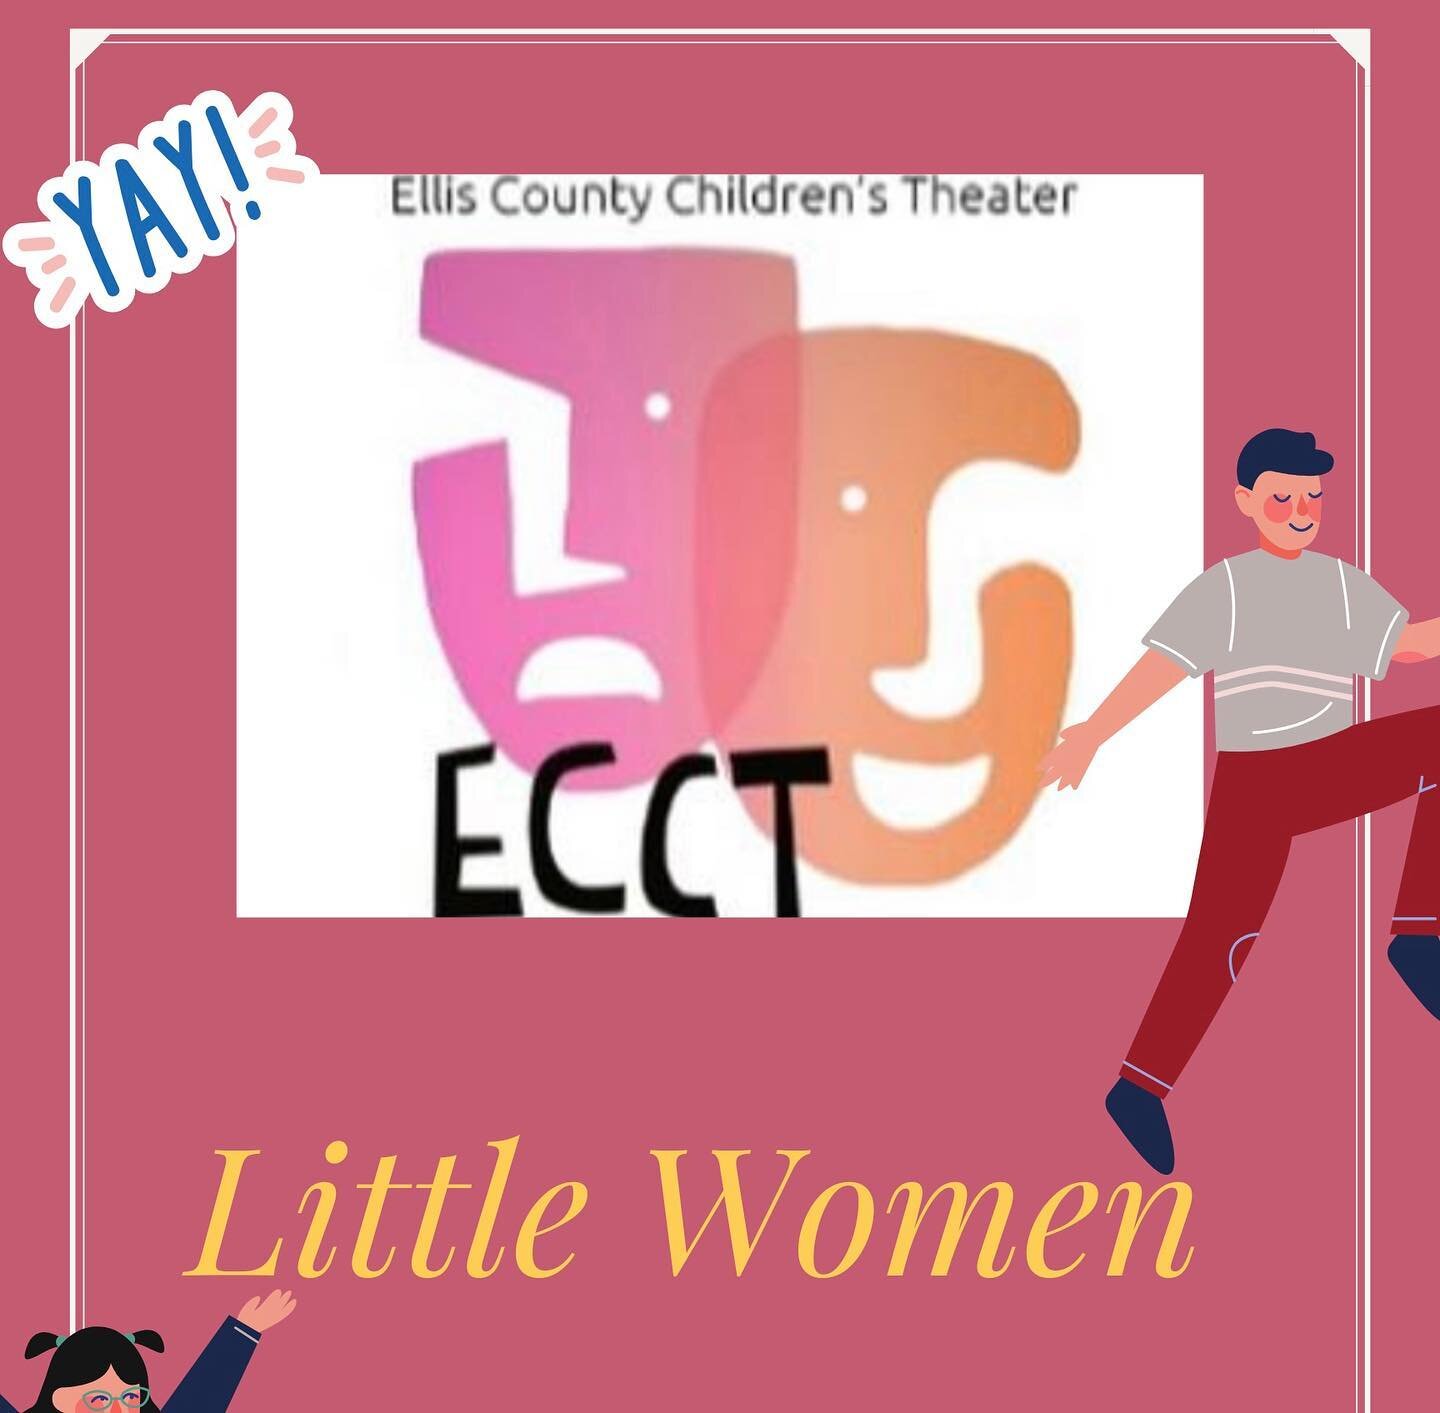 We are practicing hard!!! Set the date- Oct 27th,28th,29th and 30th.
#littlewomen #theaterlife #musical #ecctshows #greatshow